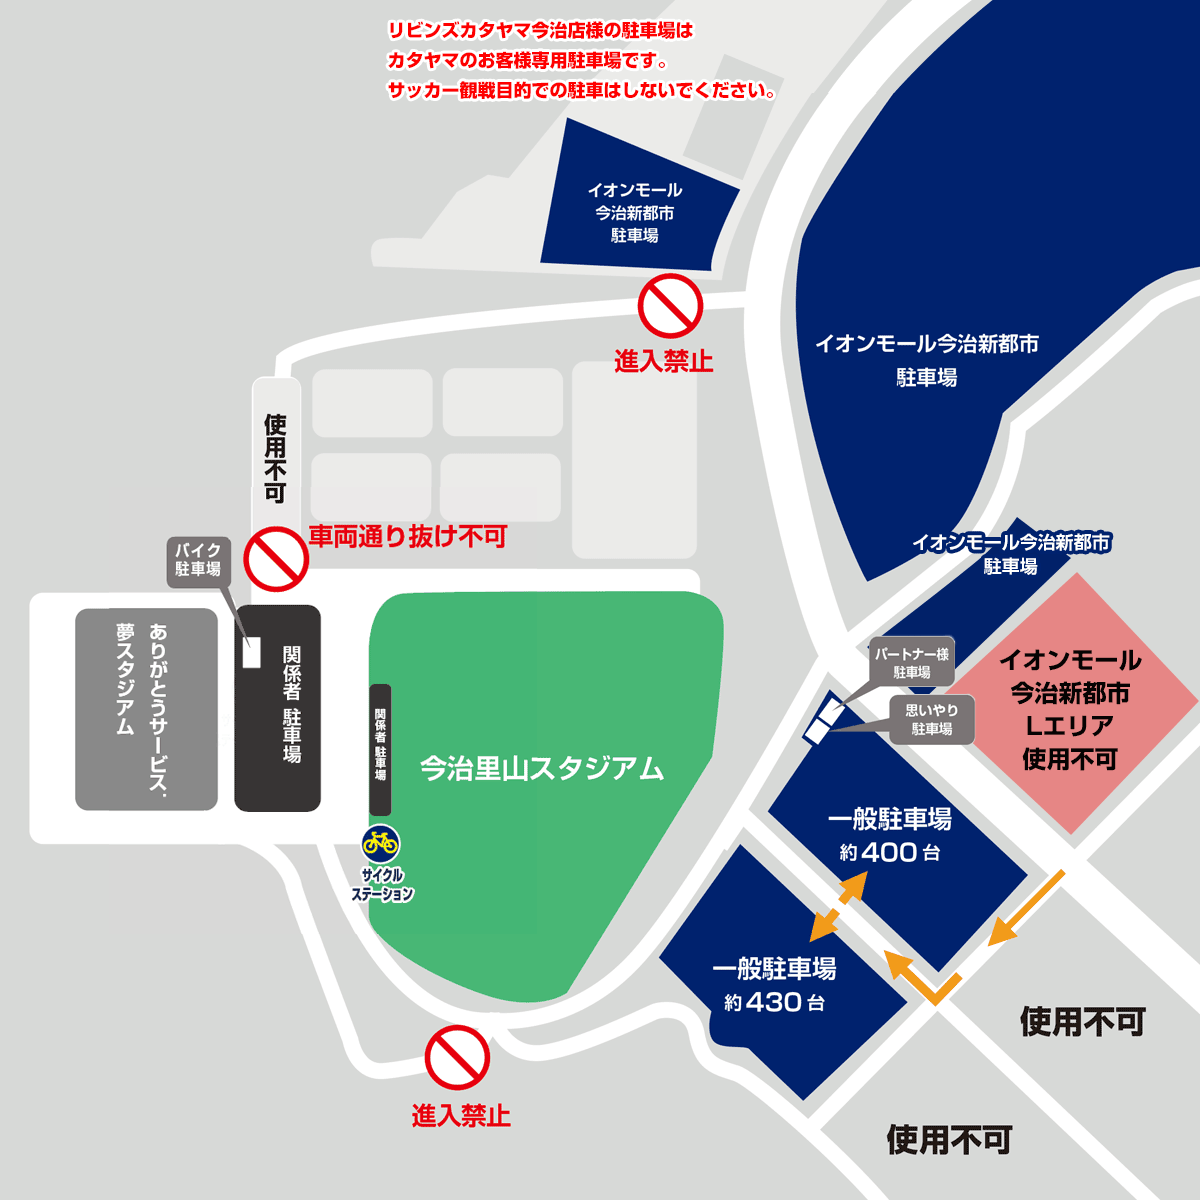 20230329_parking_map.png